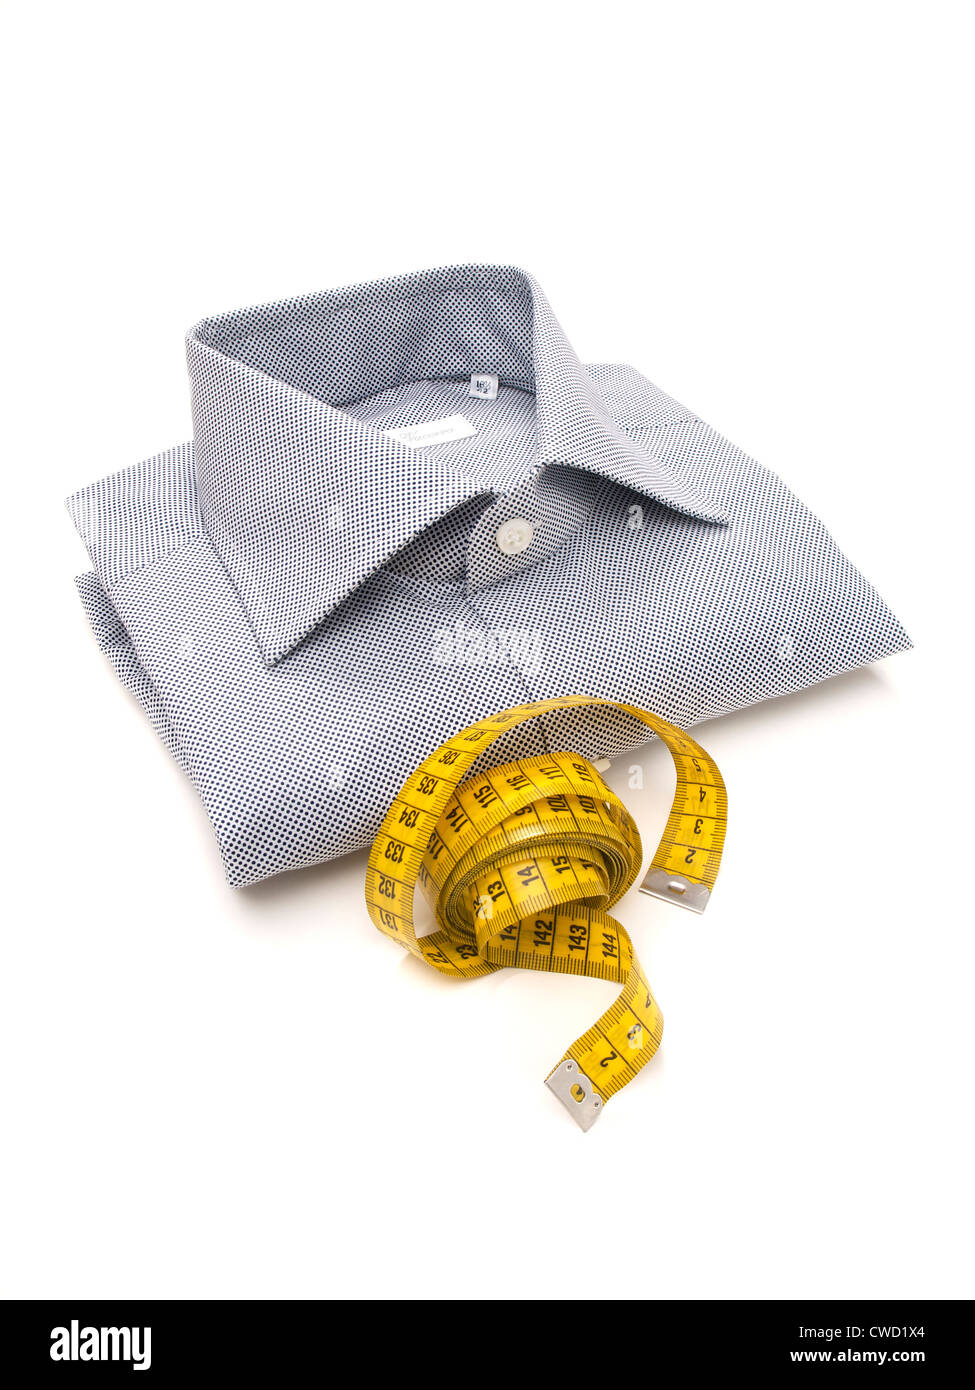 Blue and white mens shirt with yellow tape measure on white background Stock Photo